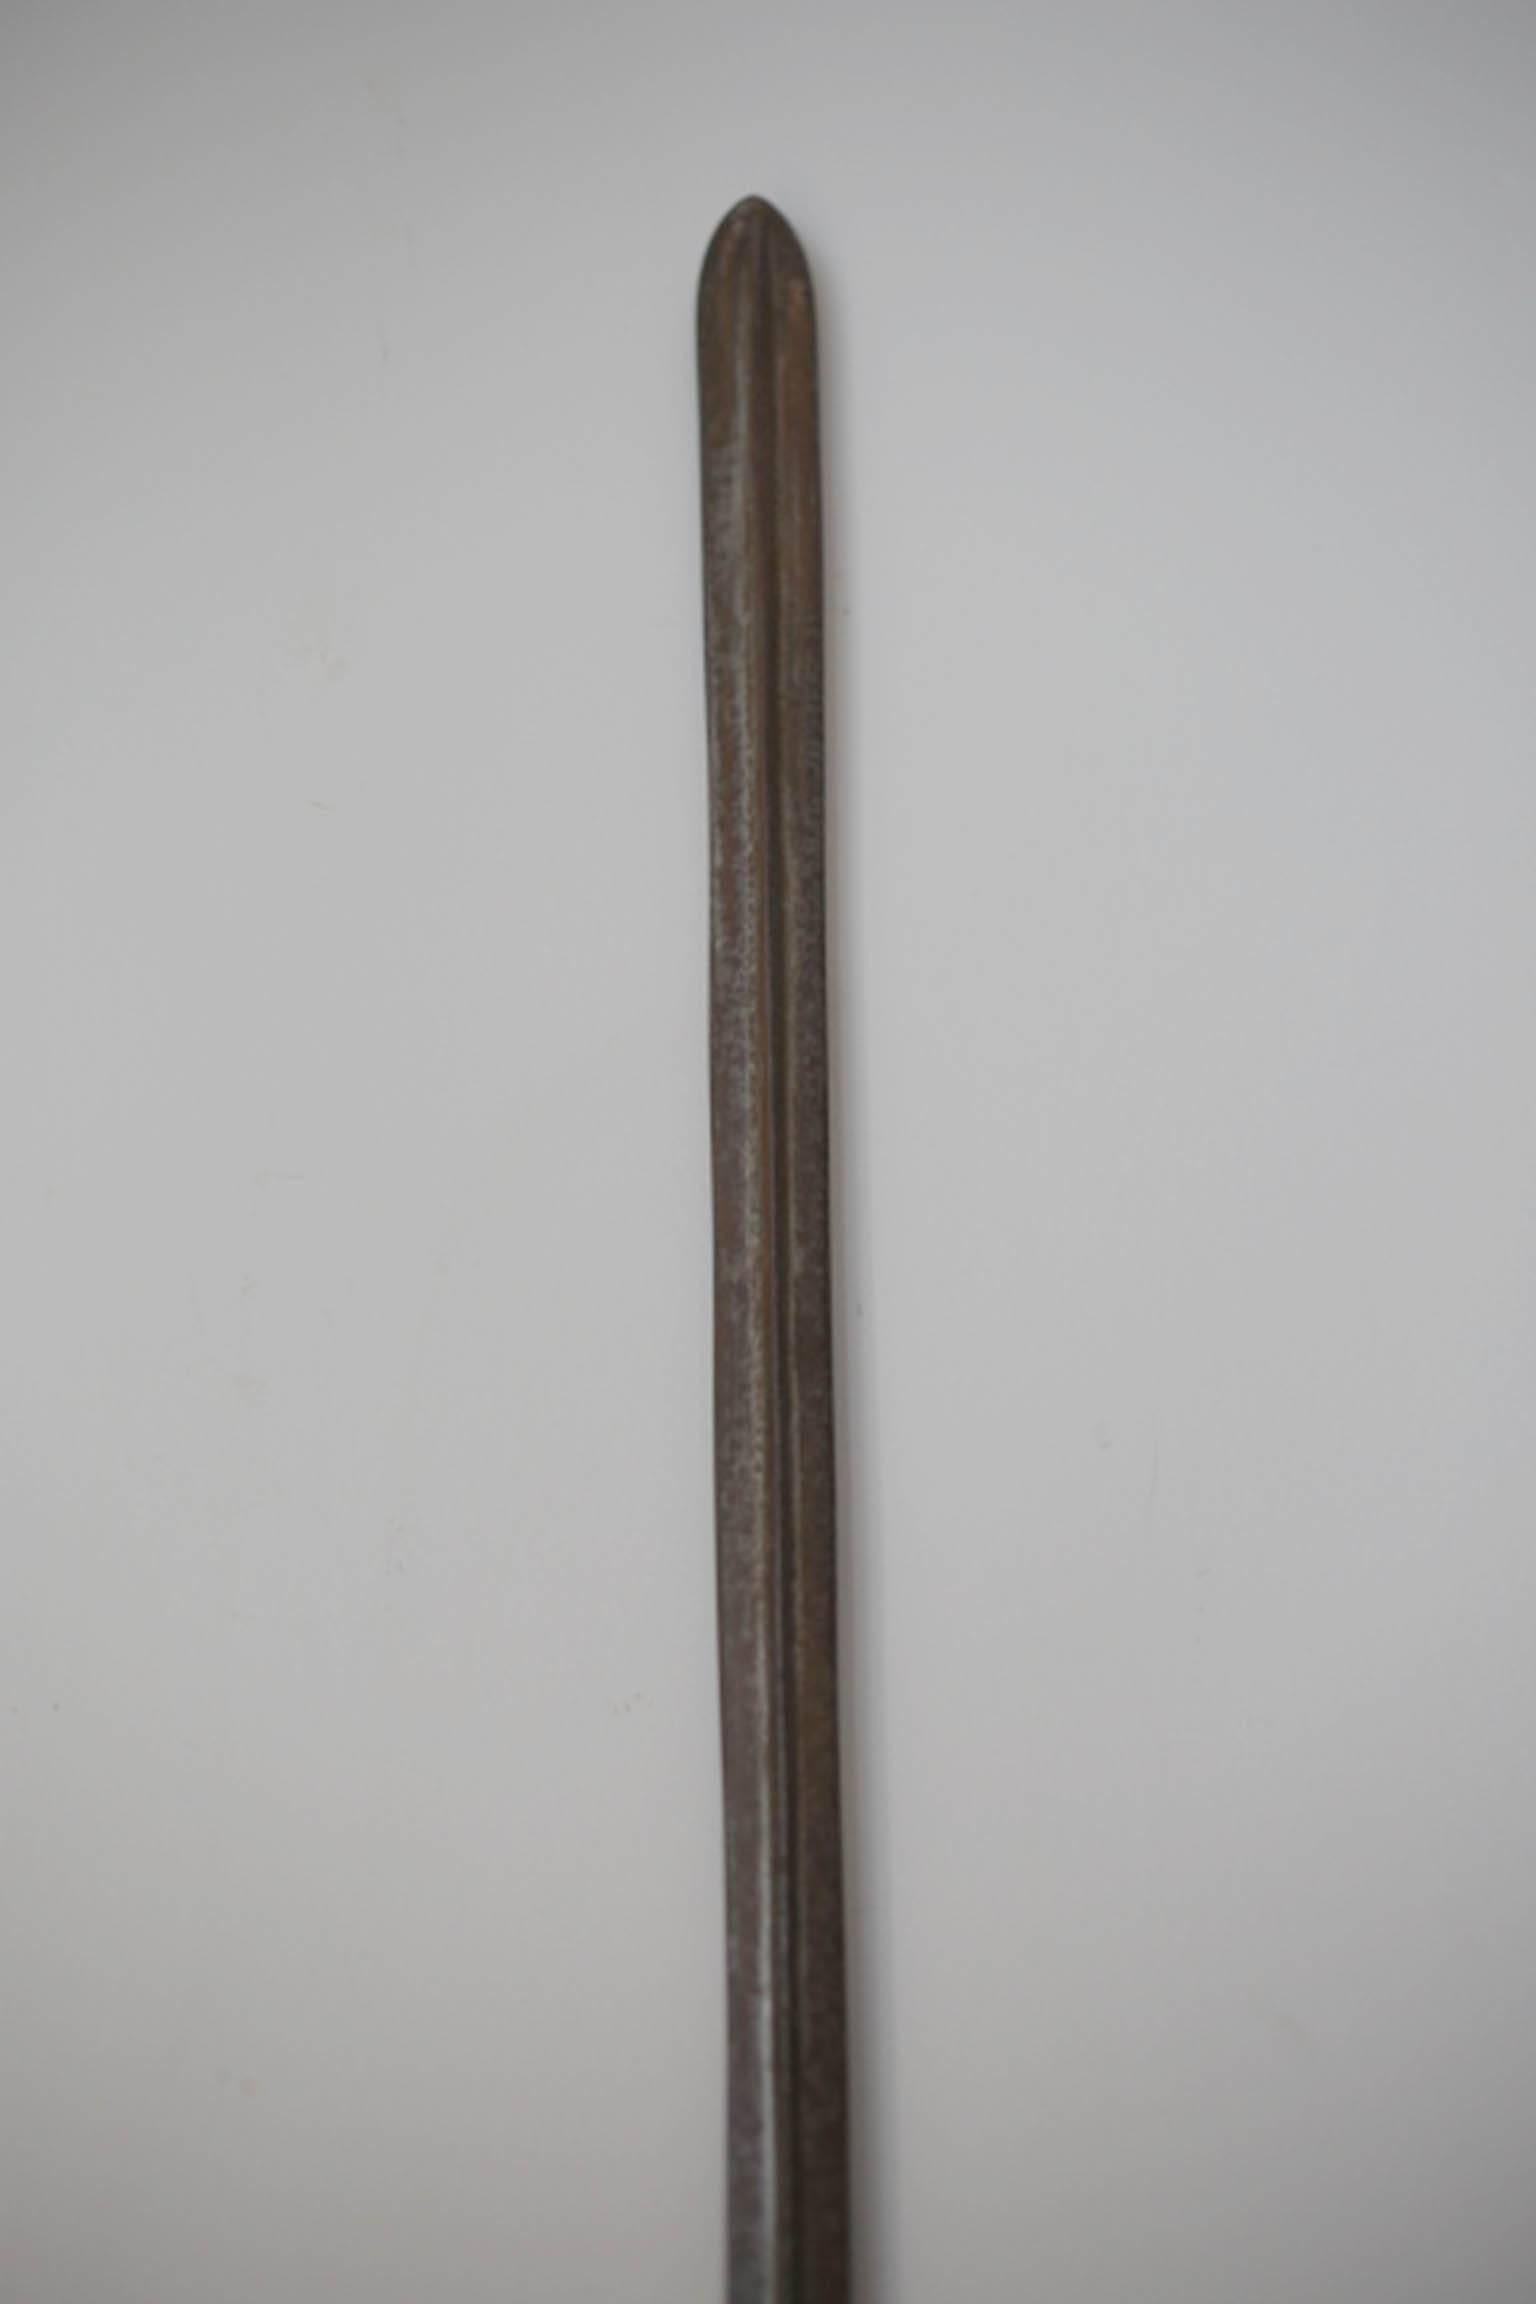 Industrial 19th Century Masaai Lioning Hunting Spear, circa 1860s-1880s